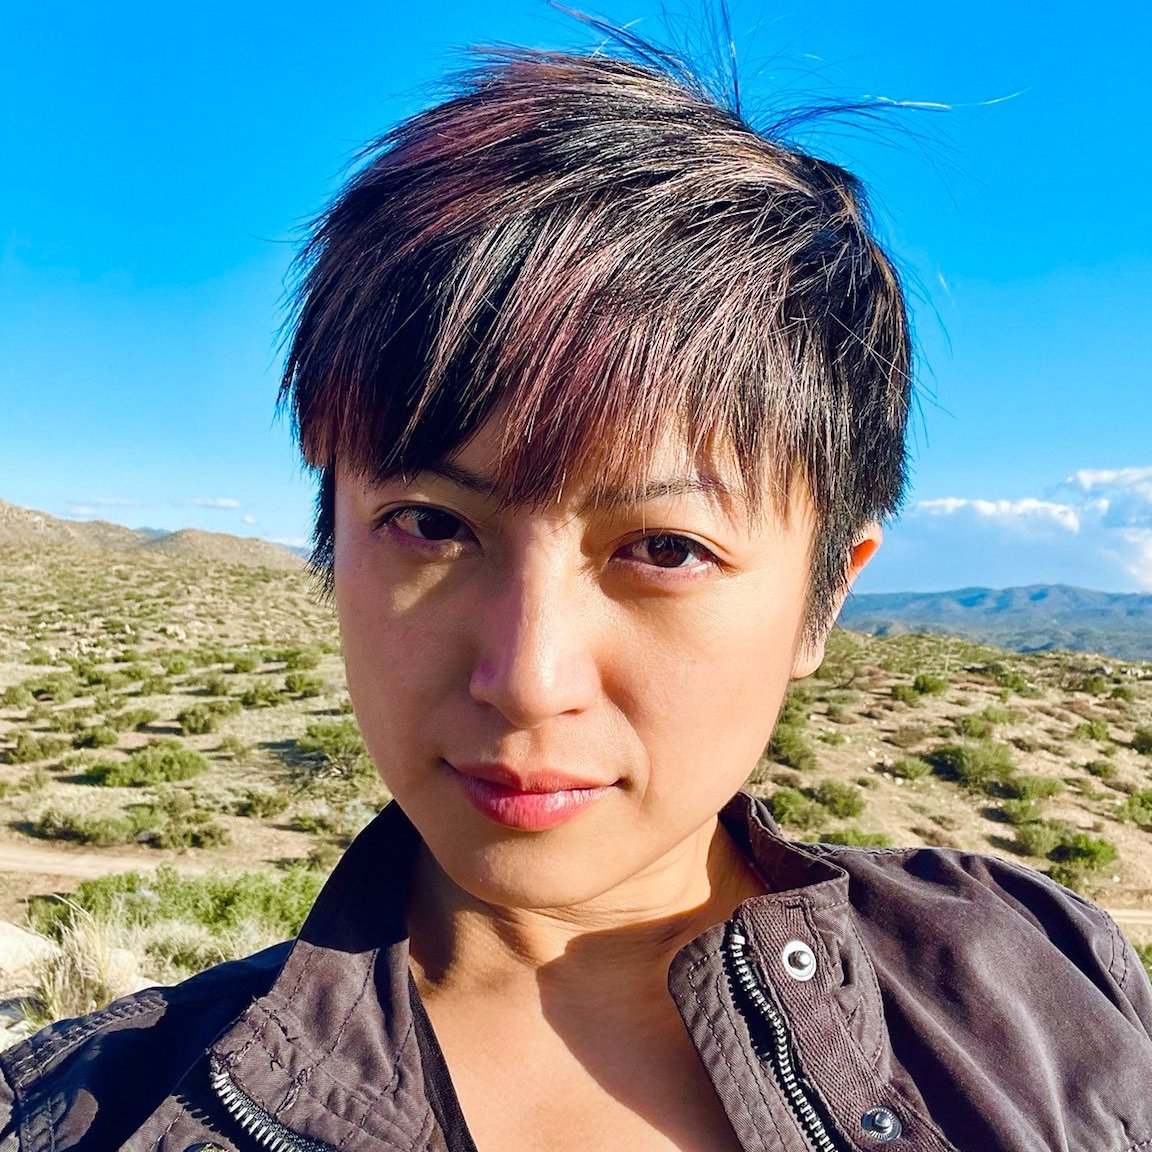 a Han-Taiwanese nonbinary person with almond-colored skin, short black hair and purple highlights stands in front of the California desert landscape.